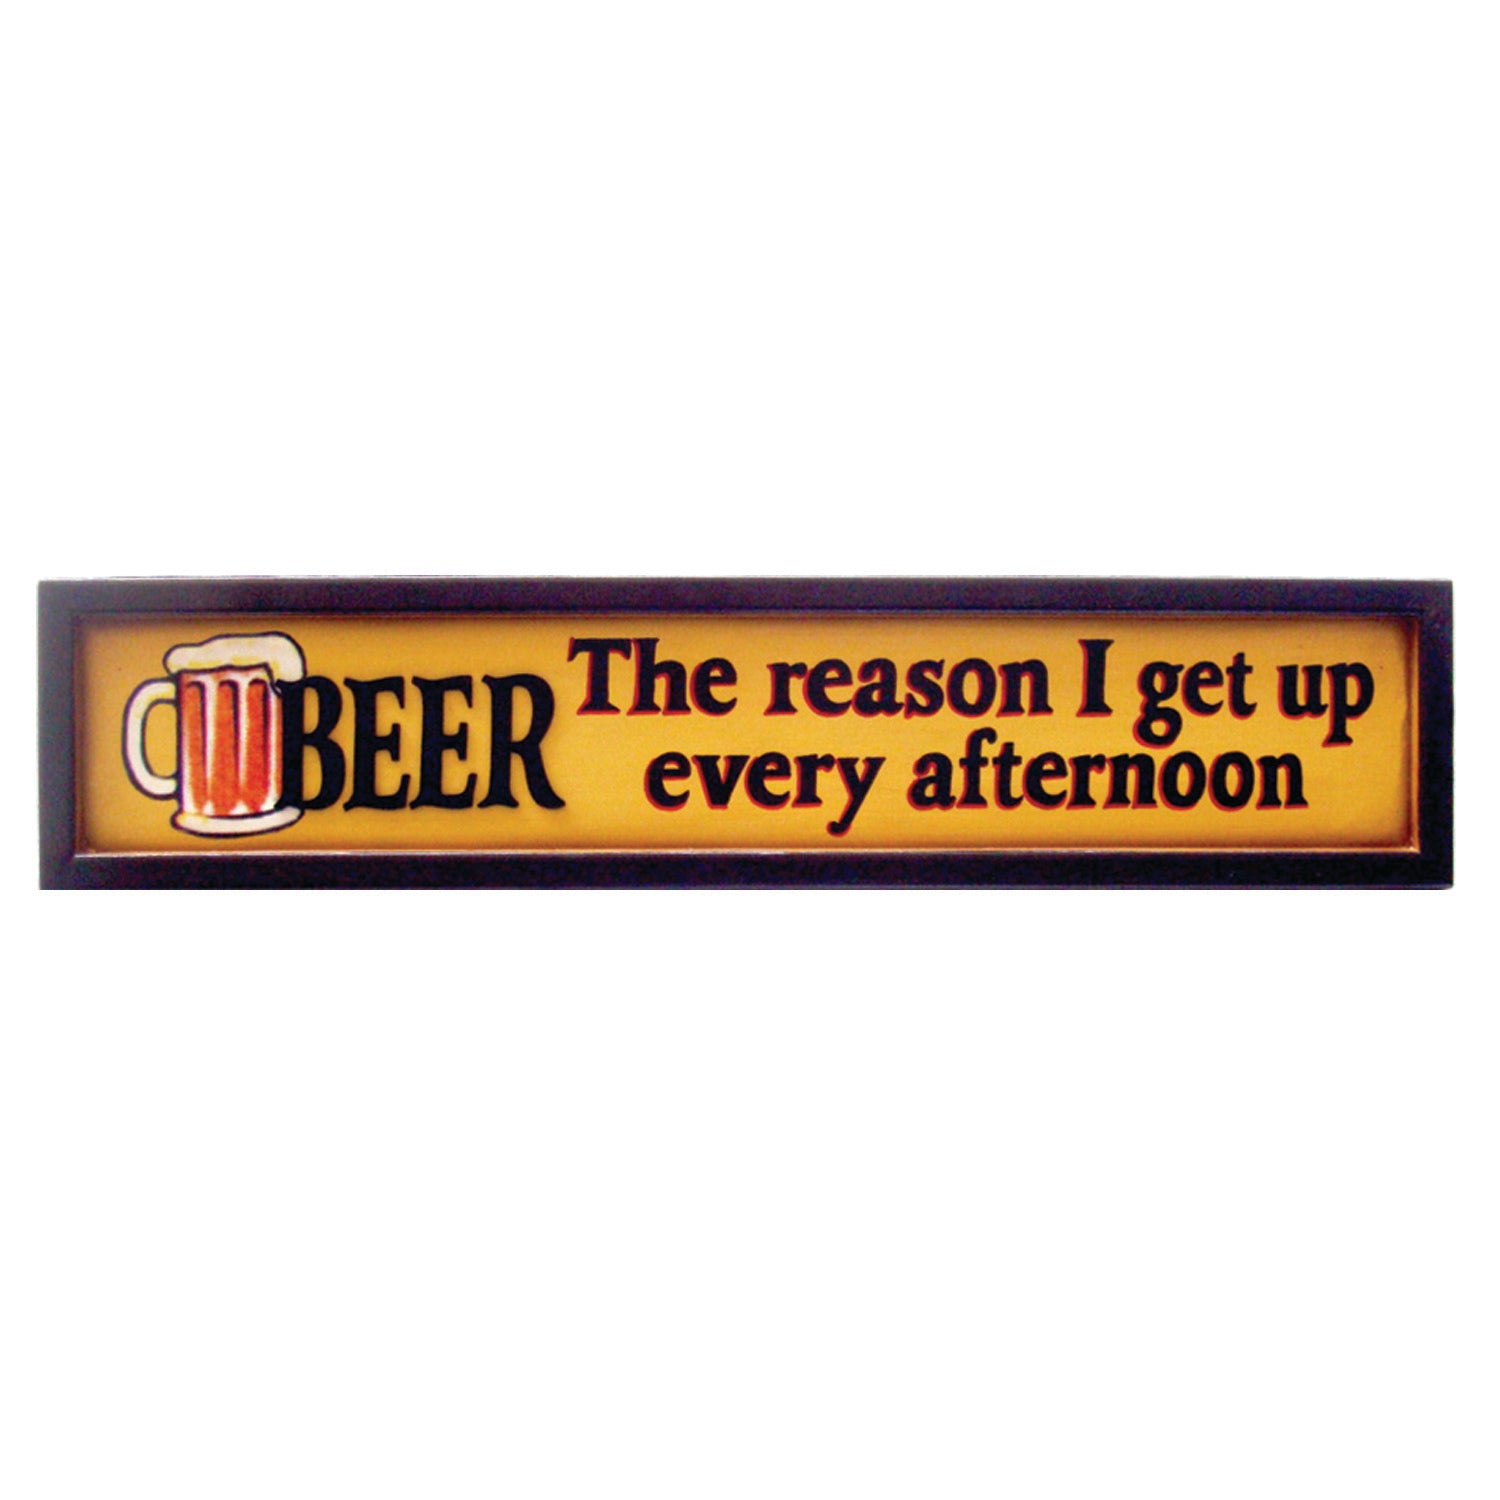 RAM Game Room “Beer Afternoon” Wall Art Sign